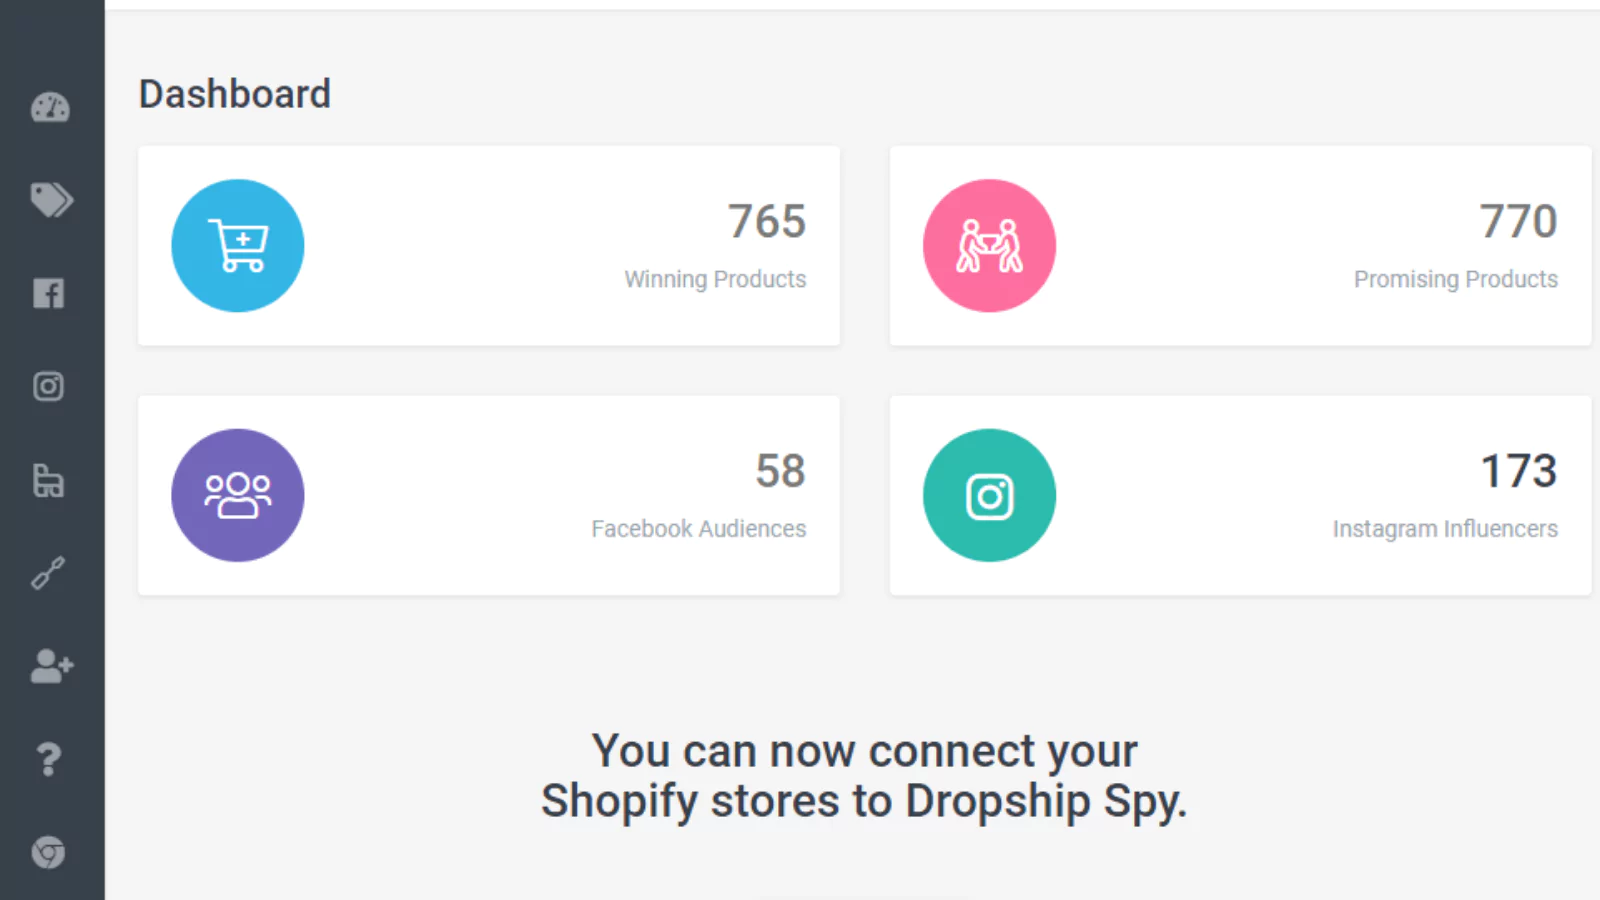 Dropship-Spy-dropship-product-research-tool